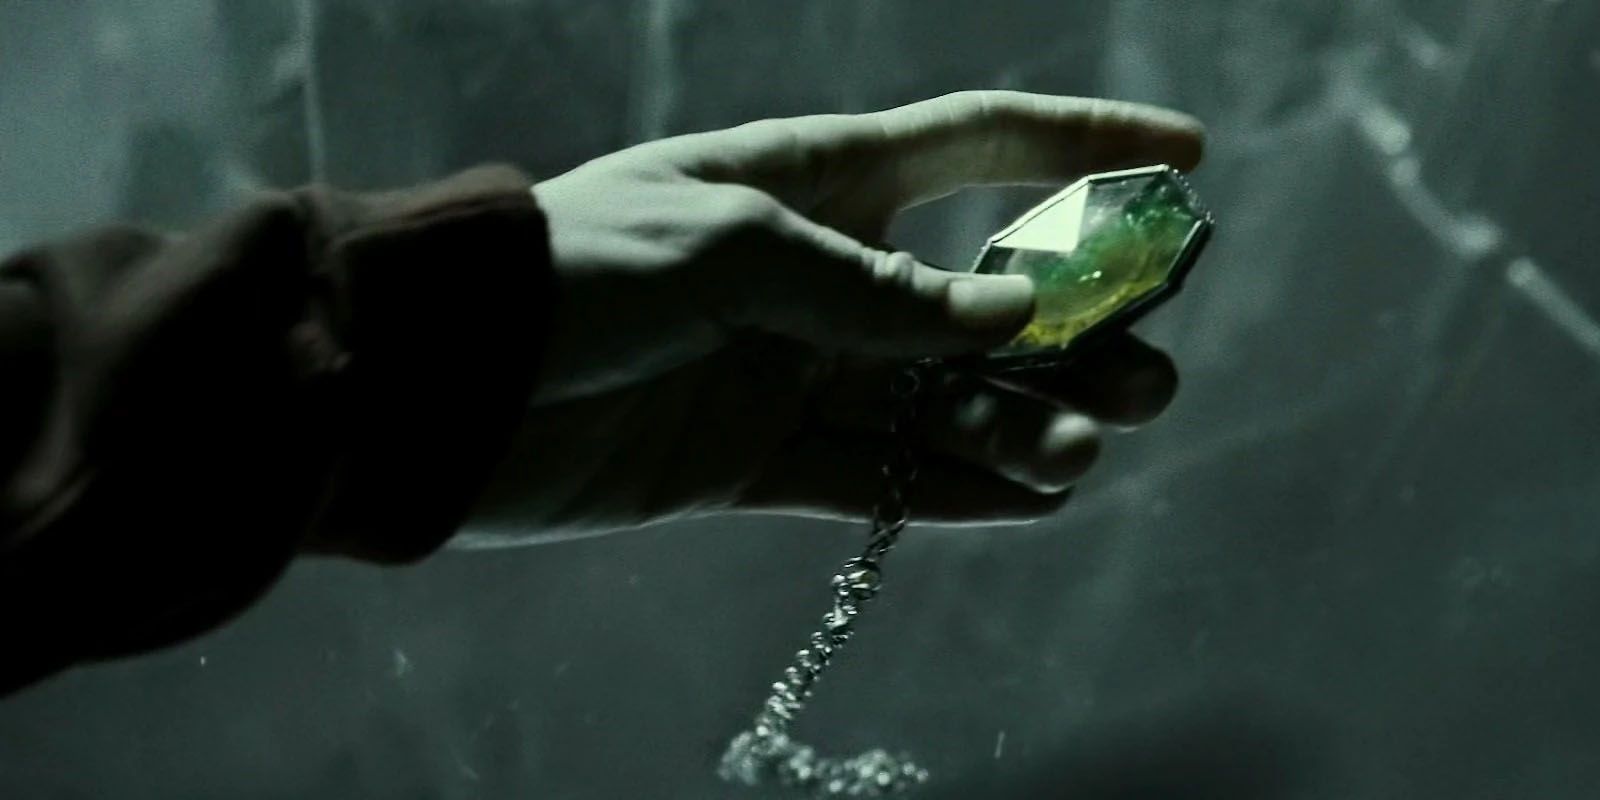 Slytherin's Locket, as depicted in Harry Potter and the Deathly Hallows